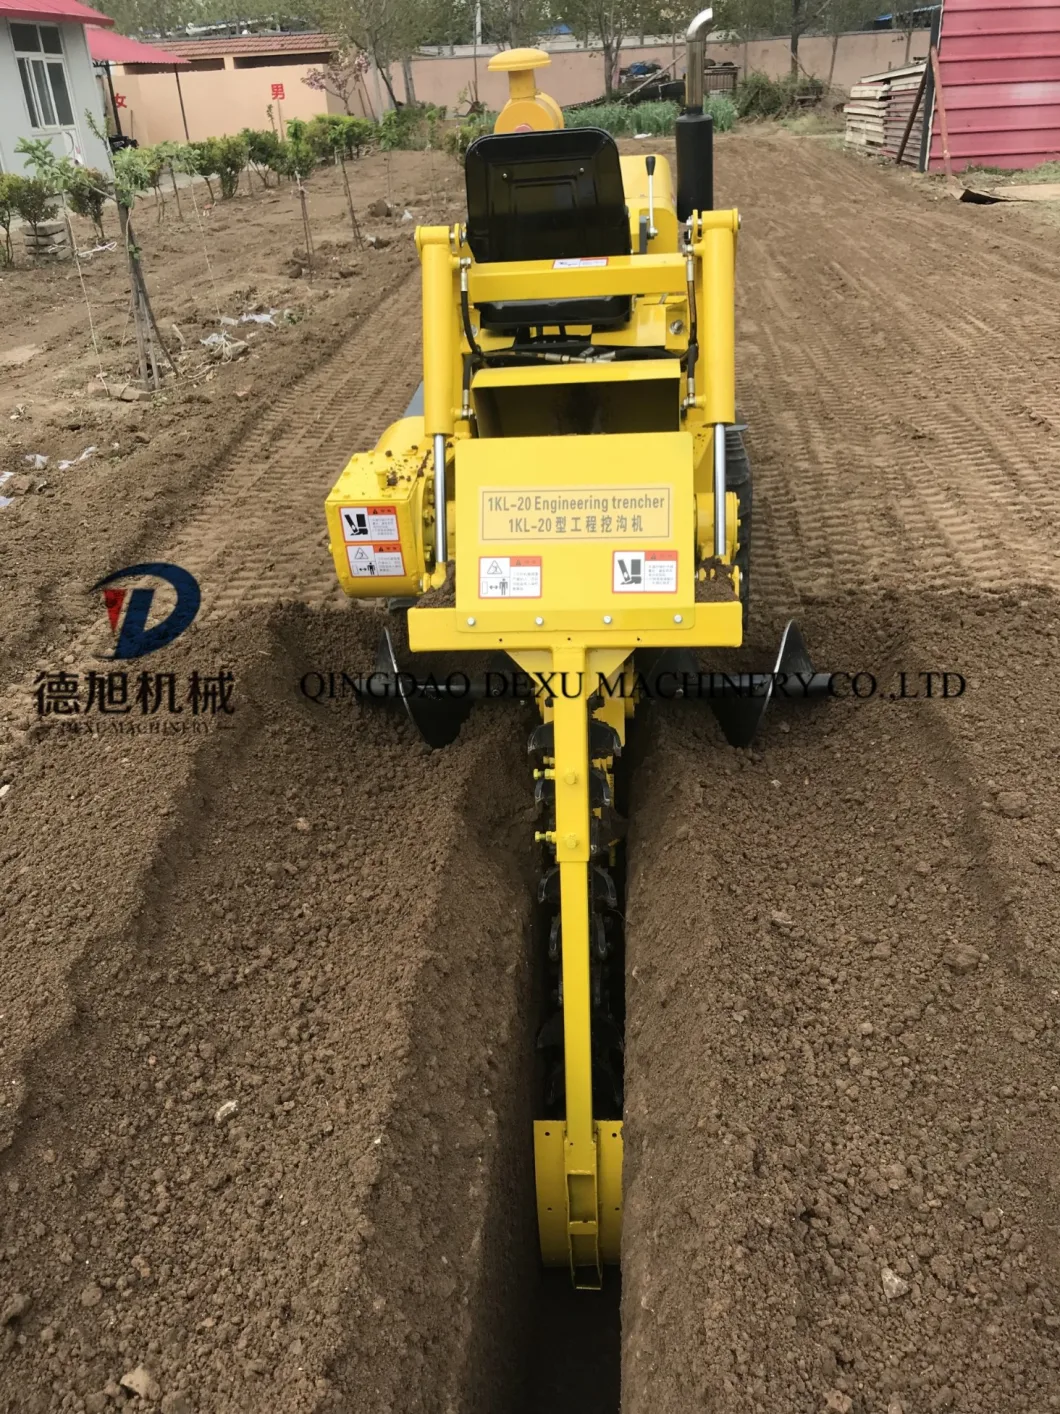 Trenching Equipment and Fast Excavator for Gas Pipeline, Oil Pipeline and Water Pipeline Digging